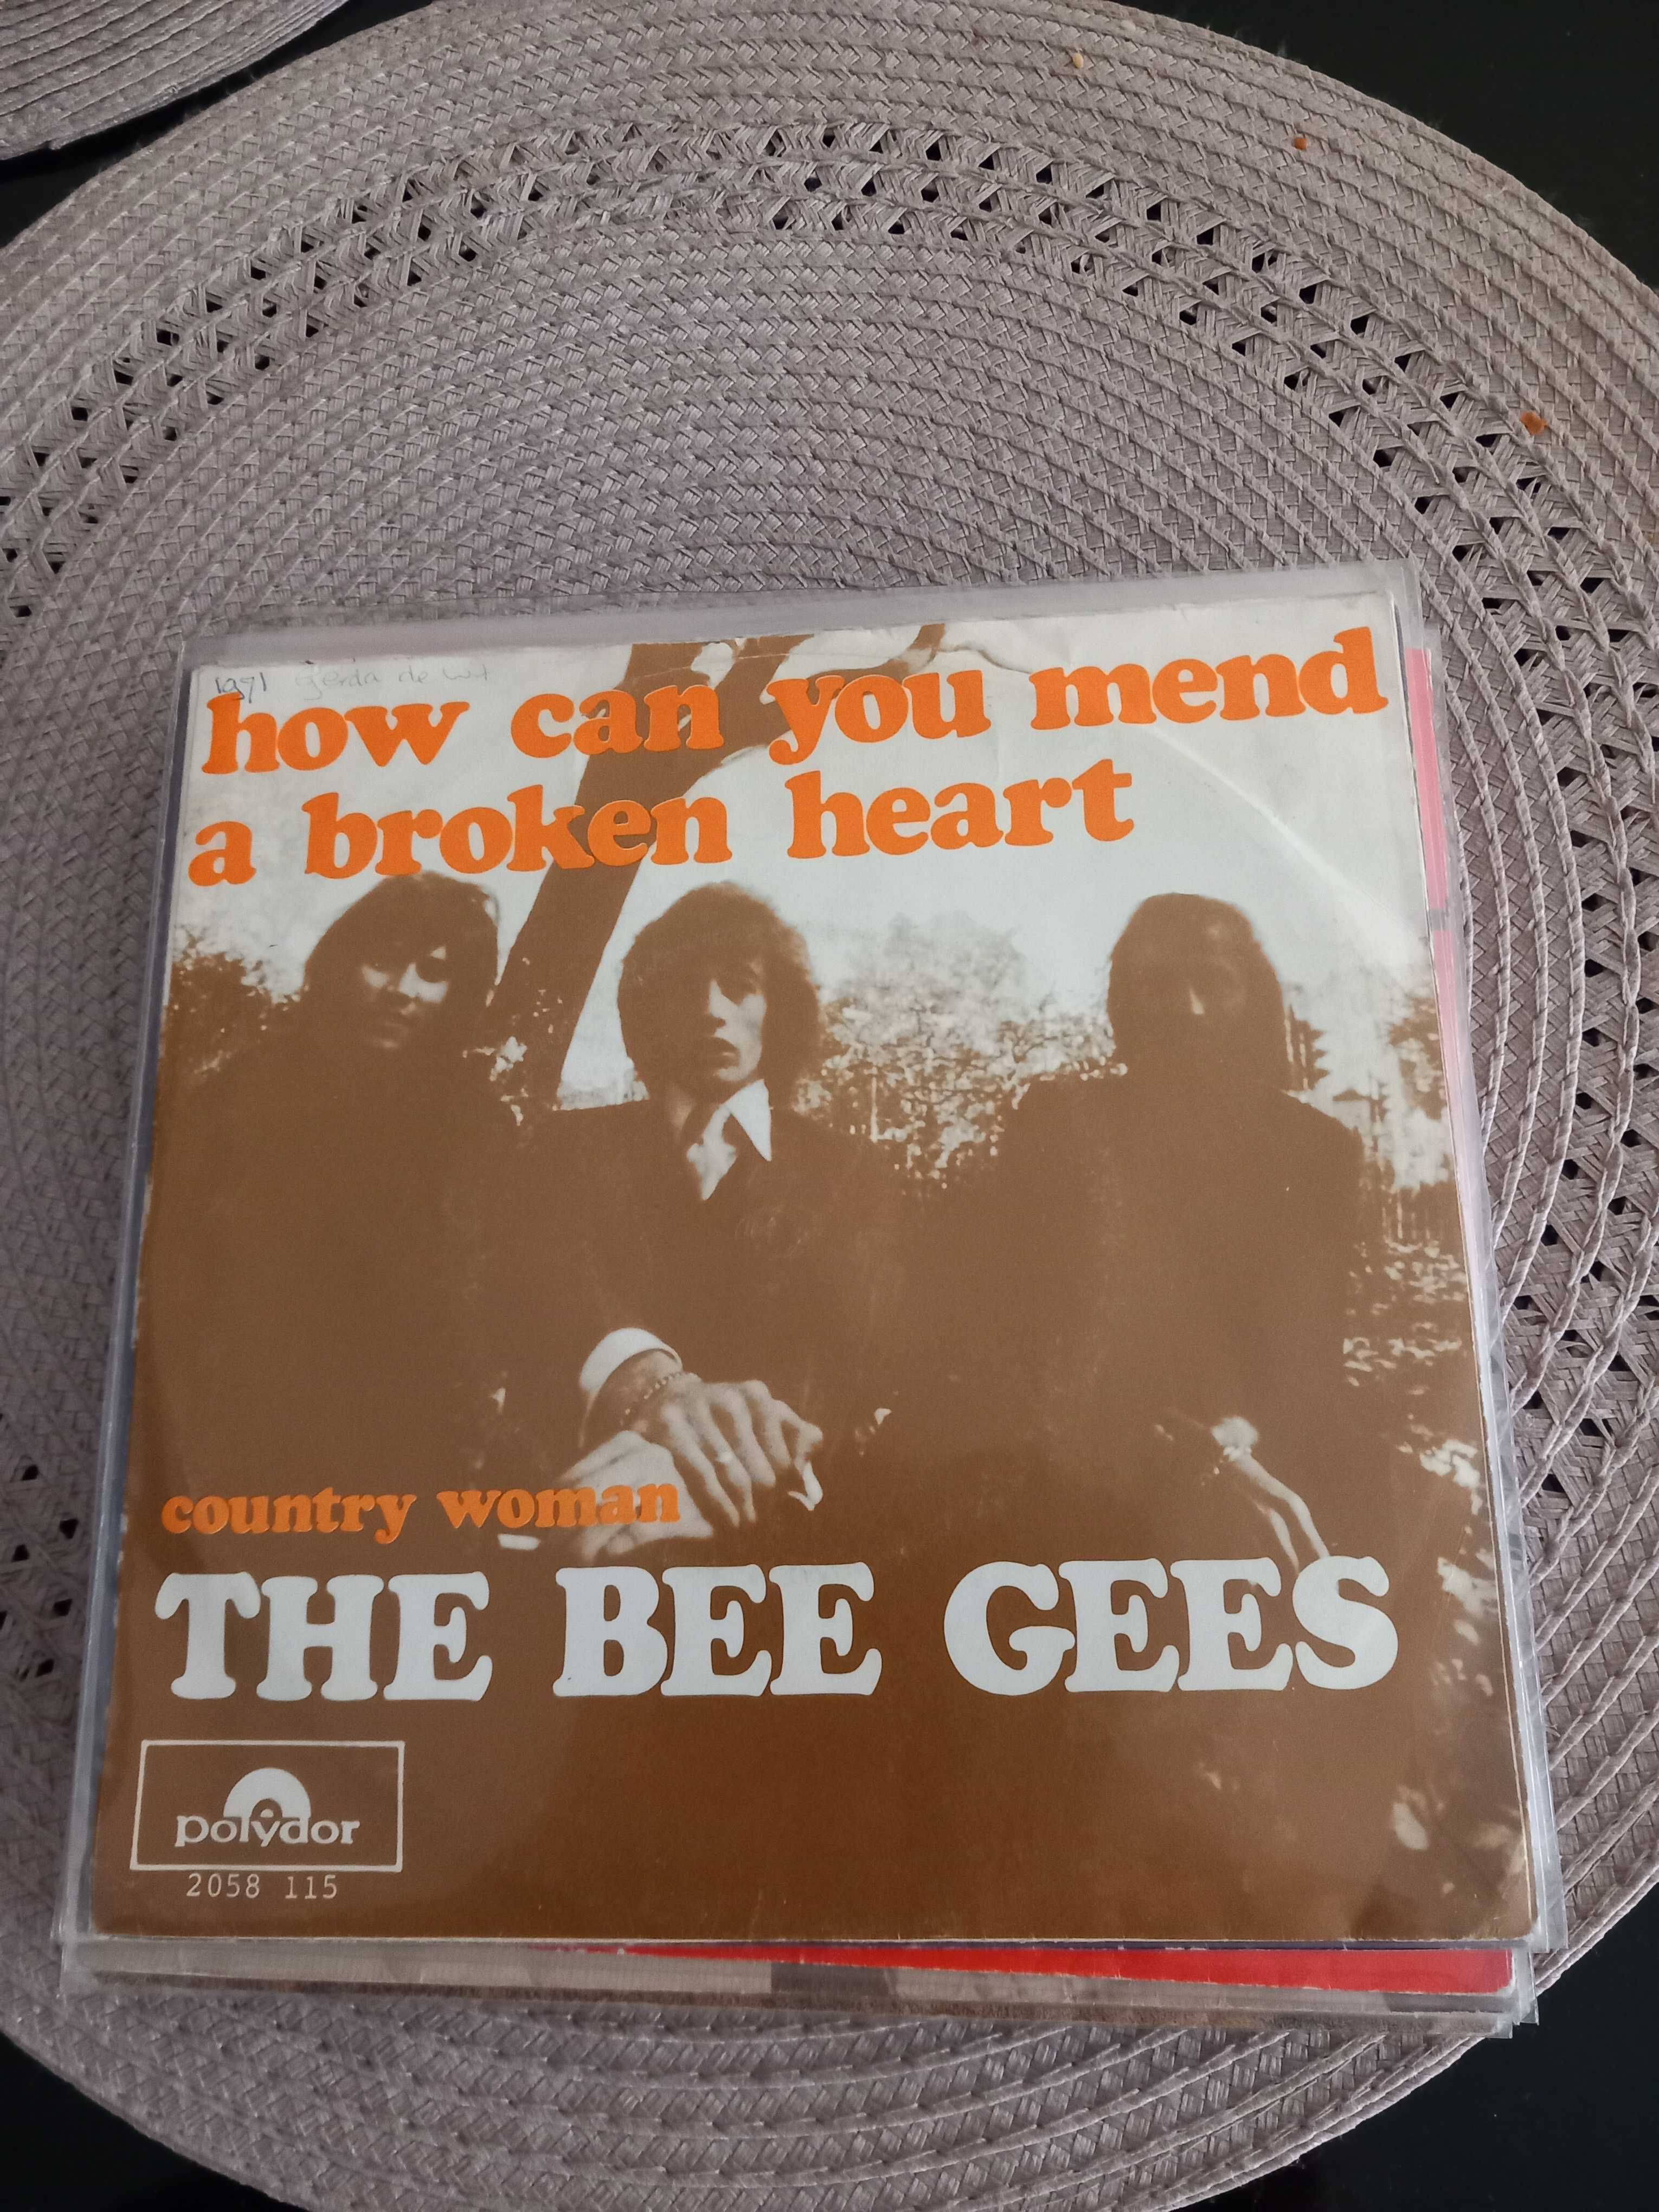 The Bee Gees - how can you mend a broken heart - singiel